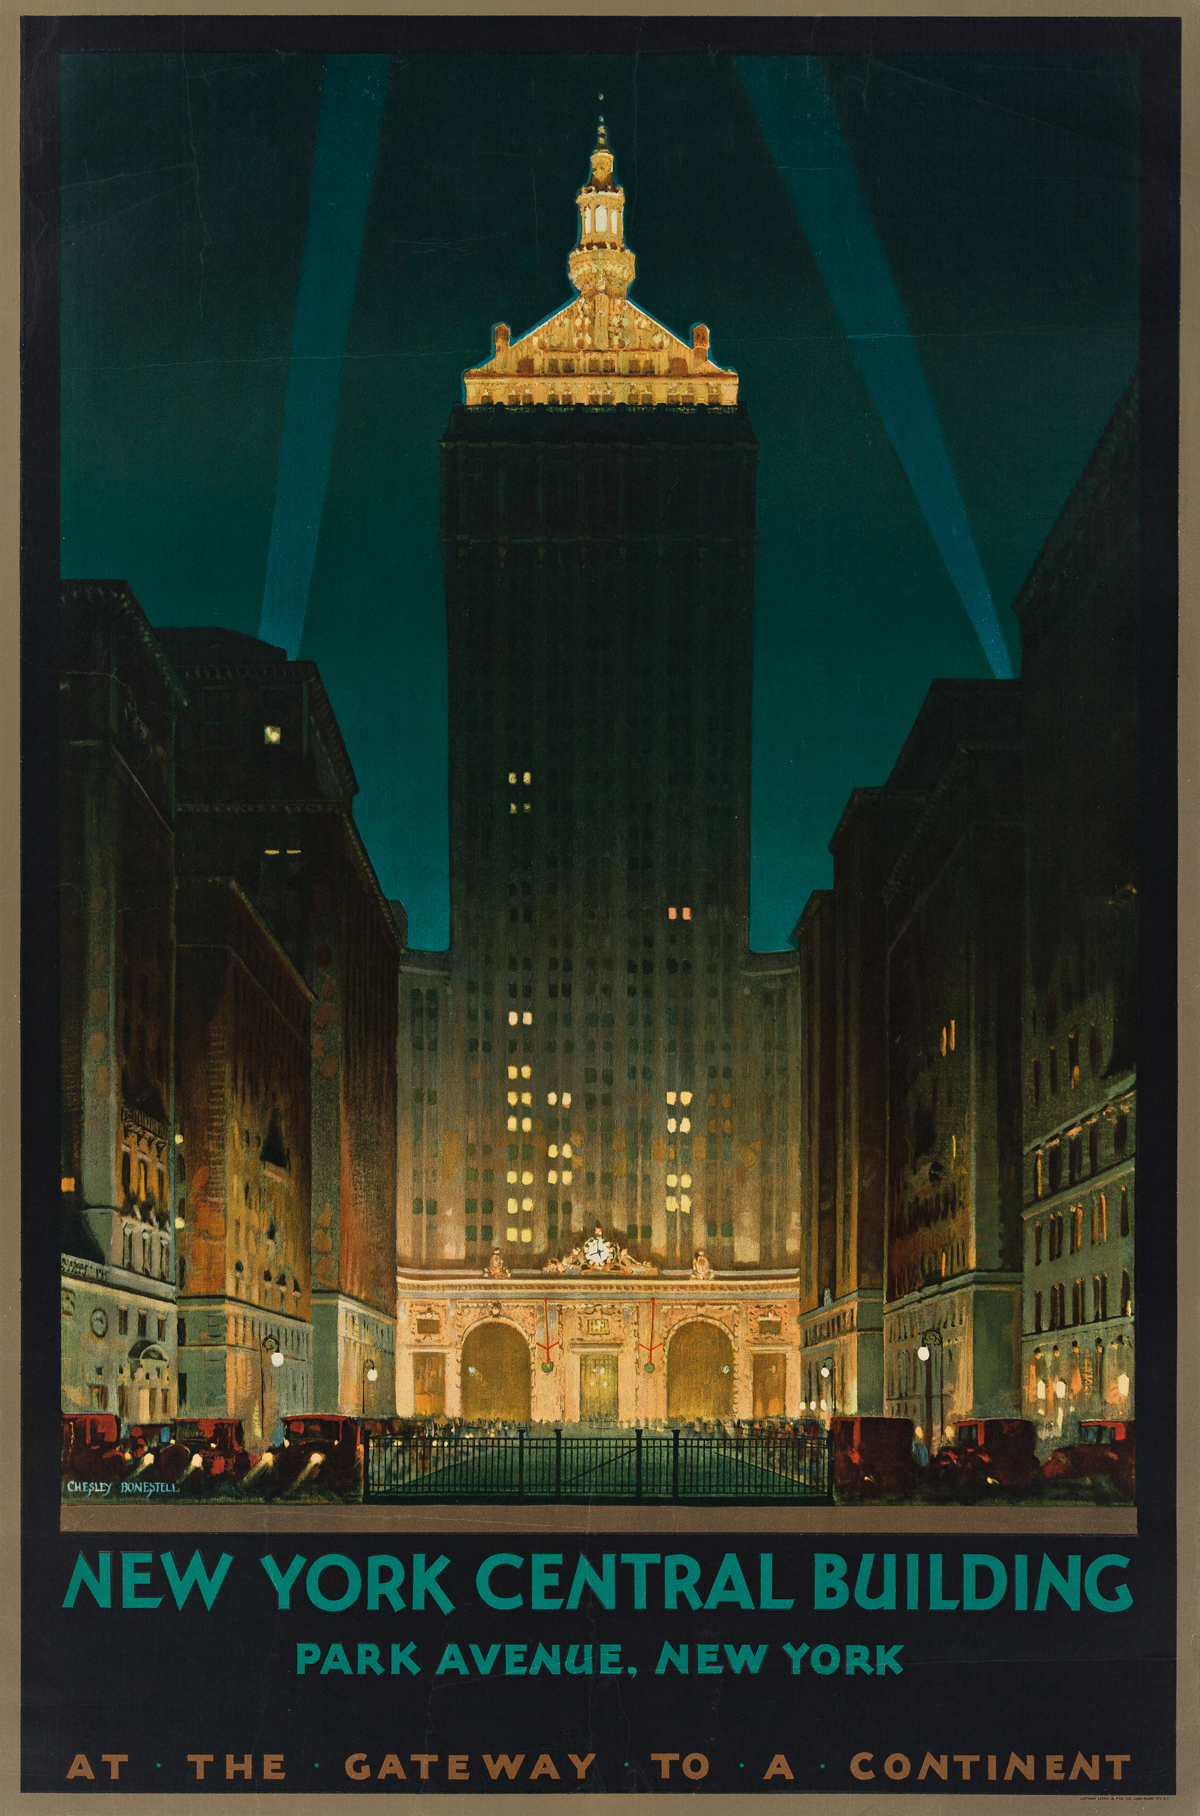 Chesley Bonestell (1888-1986).  NEW YORK CENTRAL BUILDING / AT THE GATEWAY TO A CONTINENT. Circa 1929.